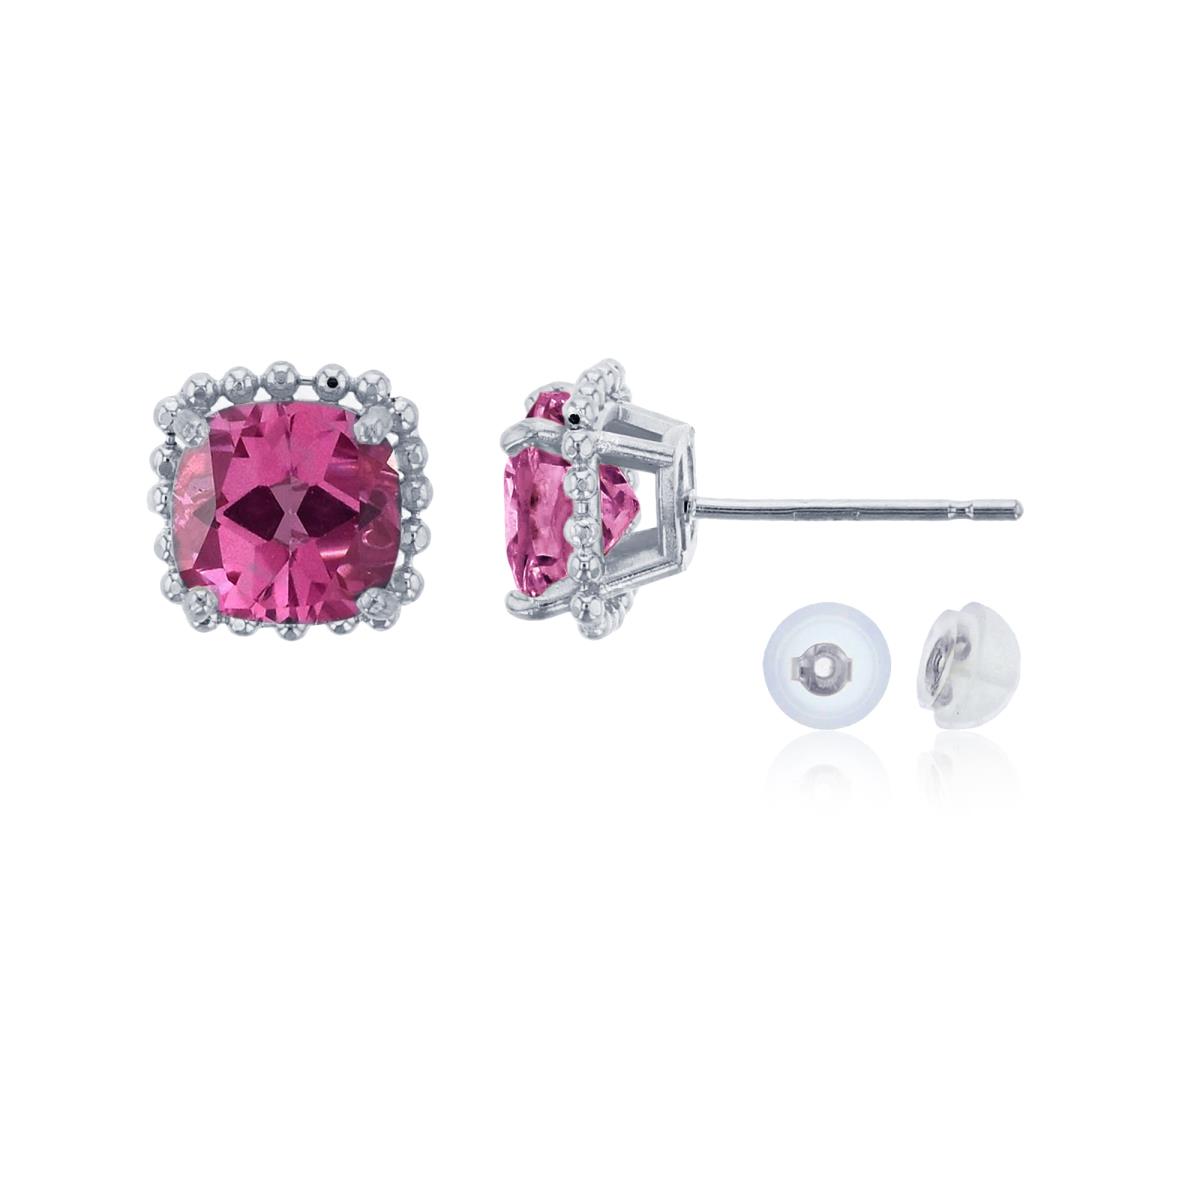 10K White Gold 6x6mm Cushion Cut Pure Pink Bead Frame Stud Earring with Silicone Back